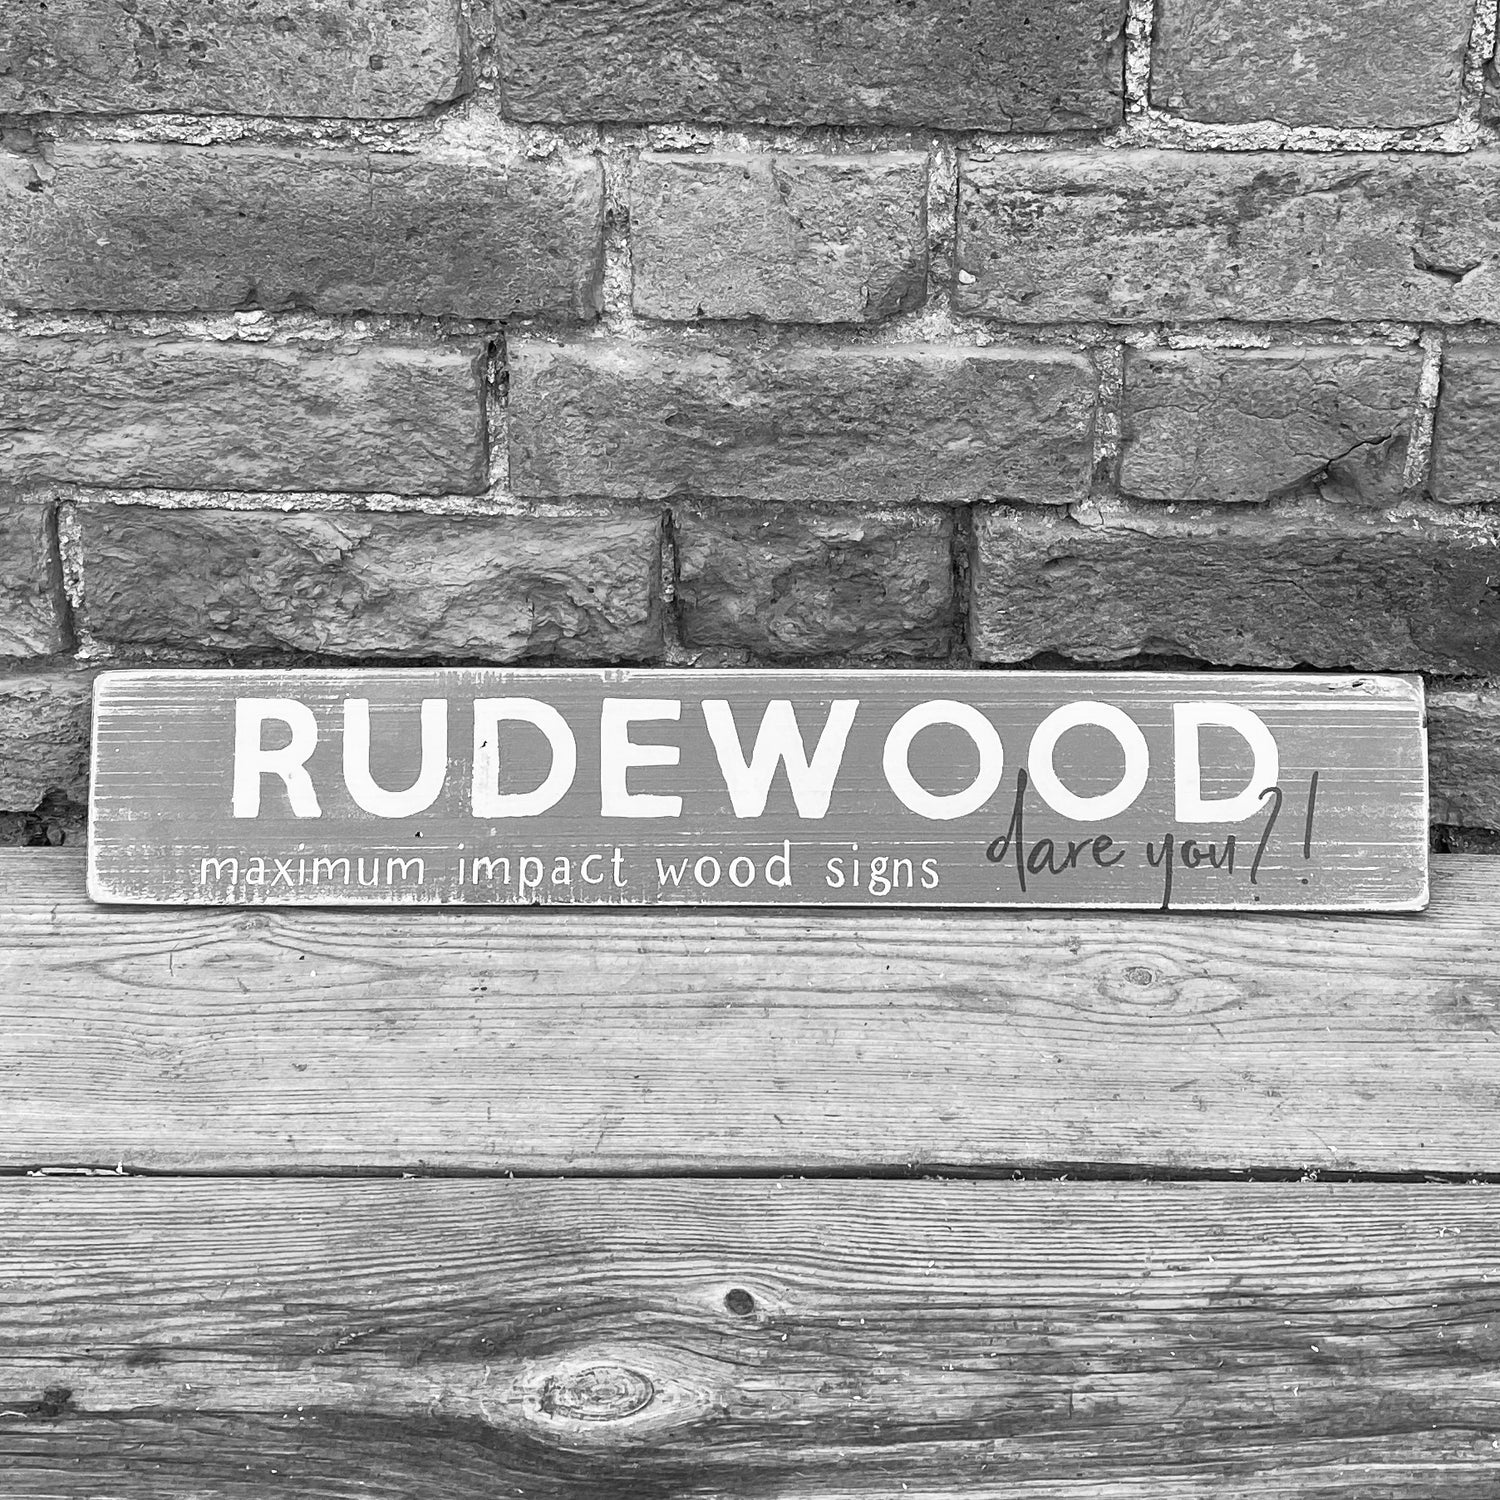 RUDEWOOD (WARNING - may cause offence)